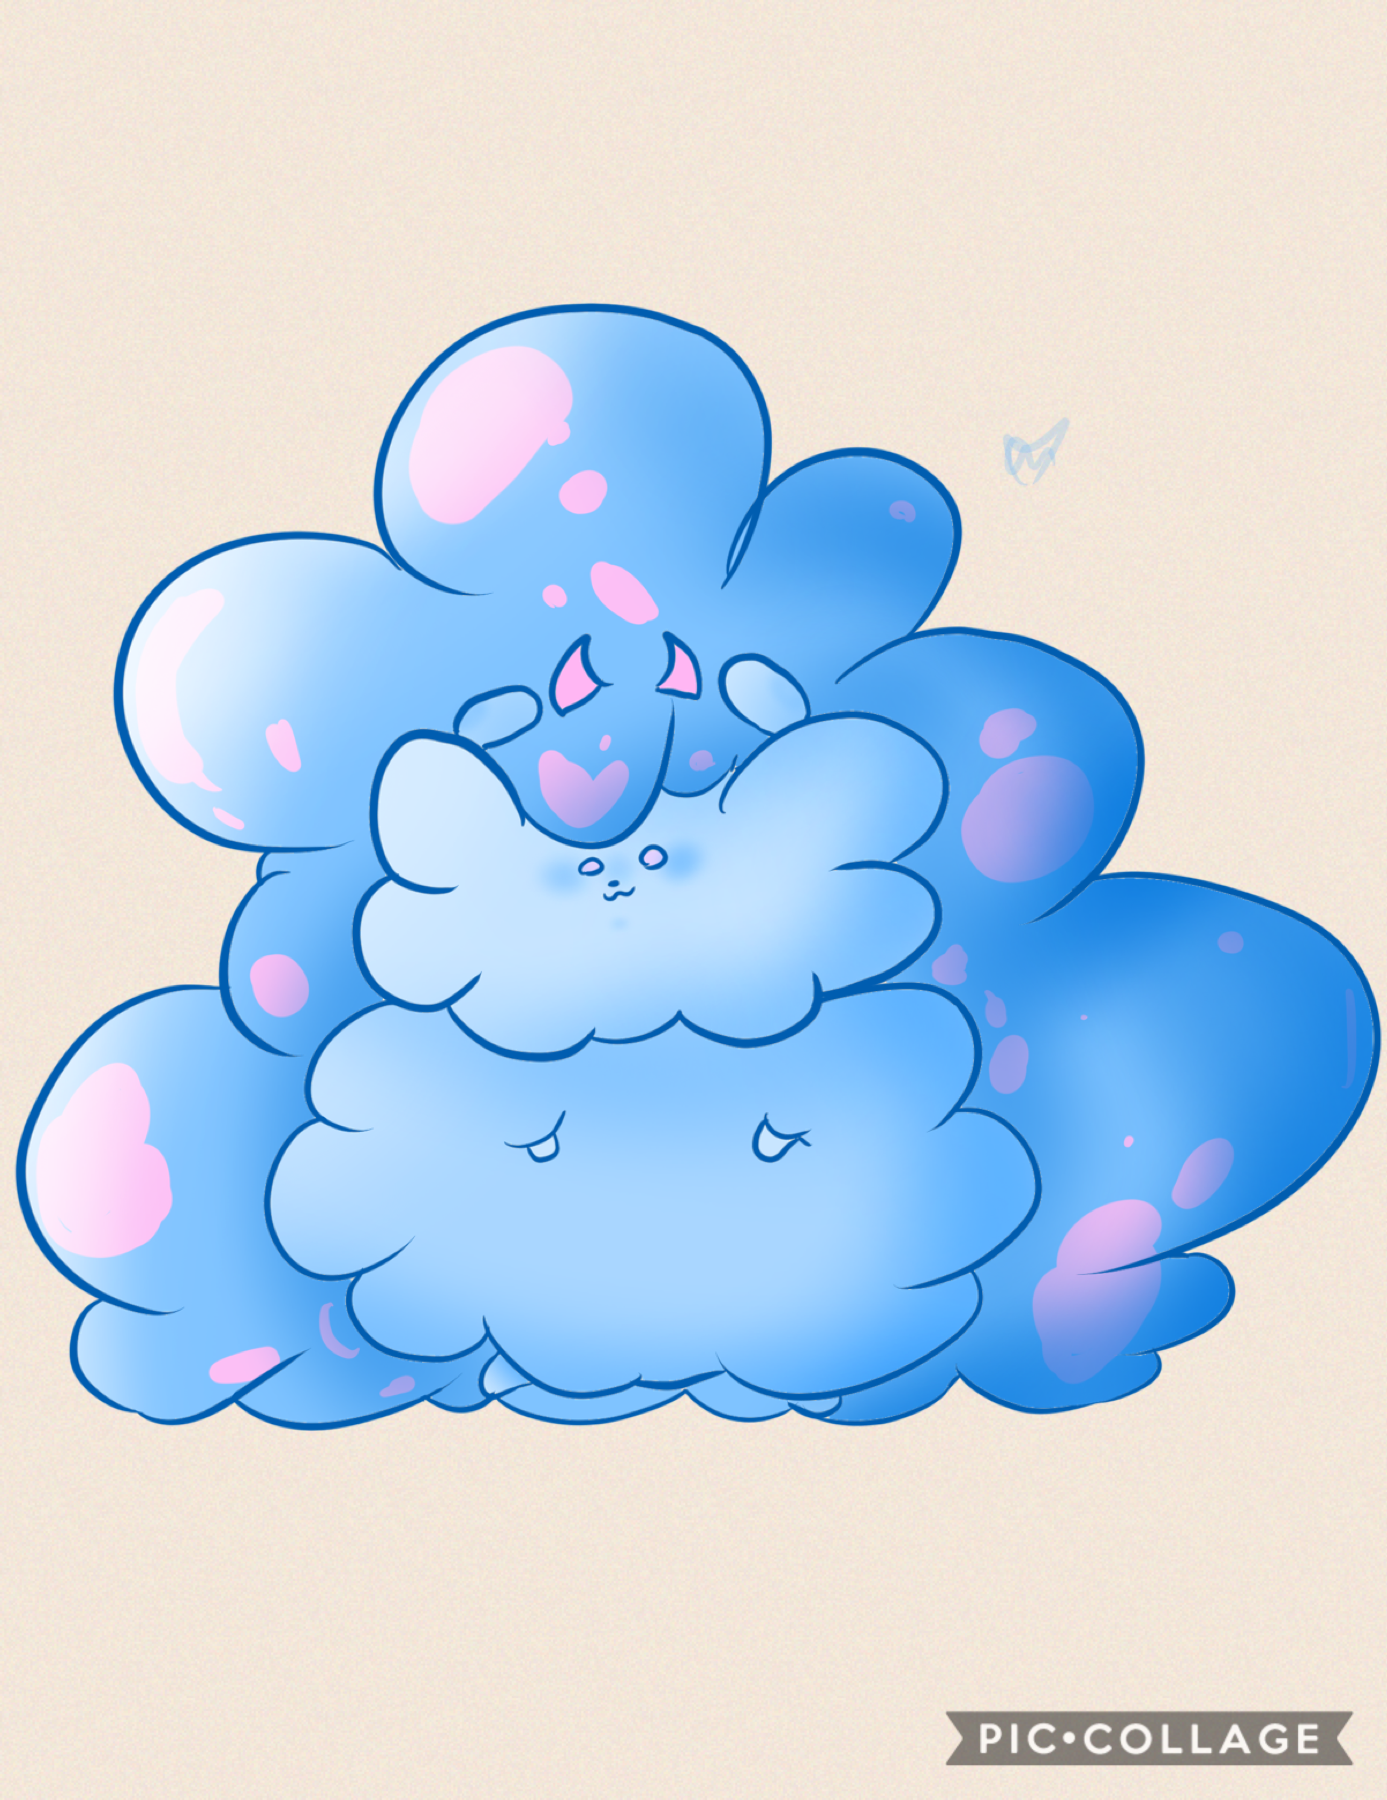 Everyday I stray father and father away from this app
Meet my new Oc Floofie Puff